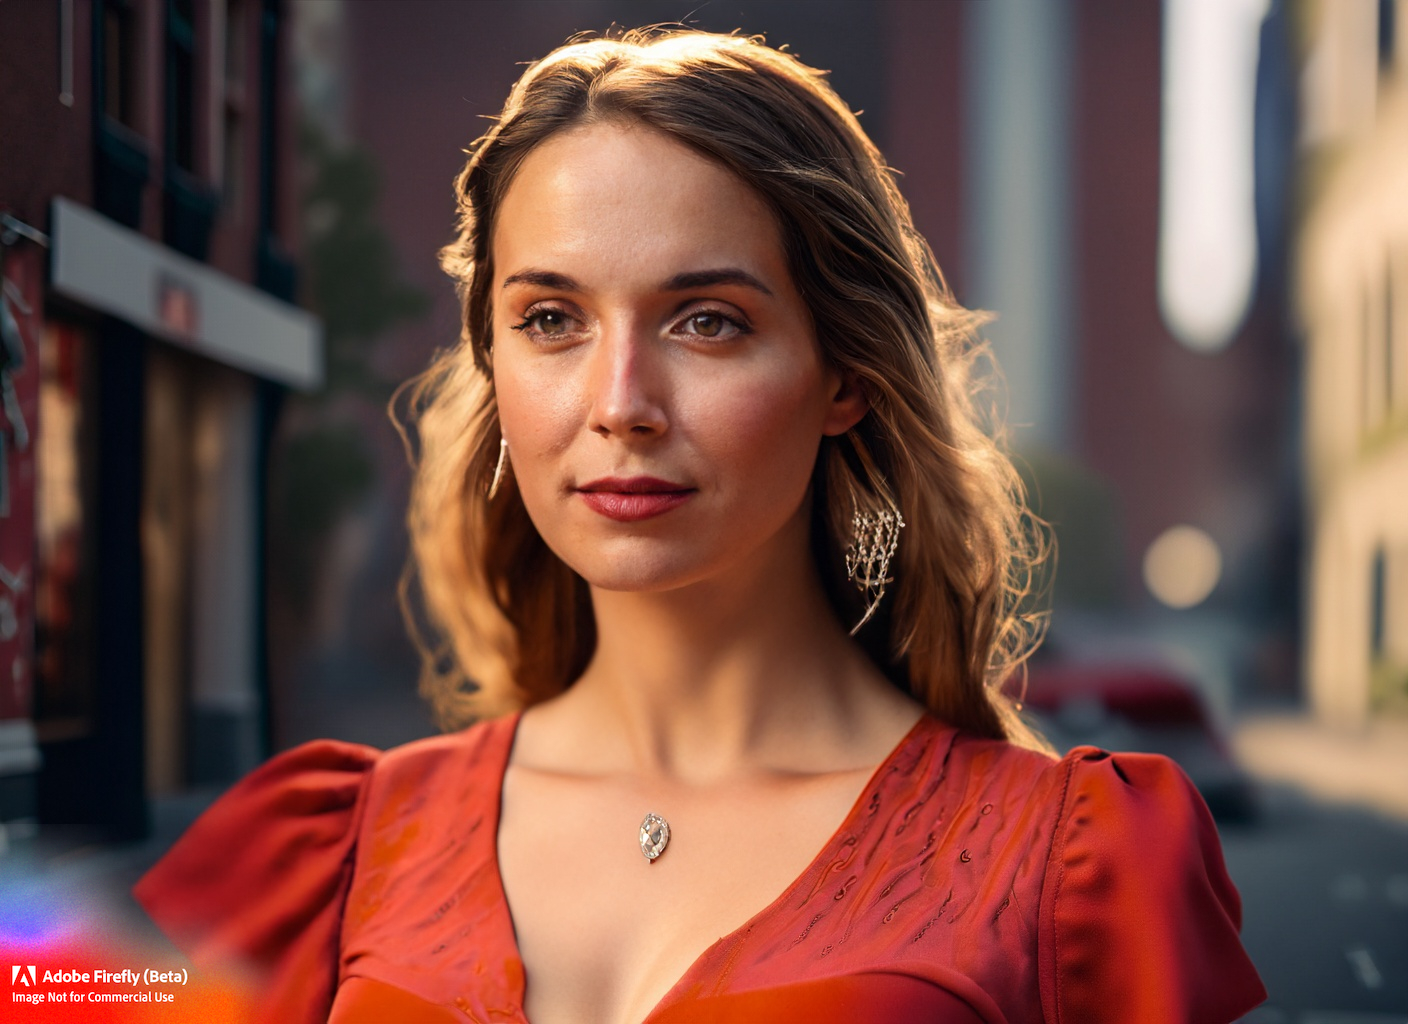 Firefly_a+highly detailed cinematic headshot portrait photograph of a beautiful woman standing in the street, red open summer dress, ultra realistic, depth, beautiful lighting_golden_hour_29295